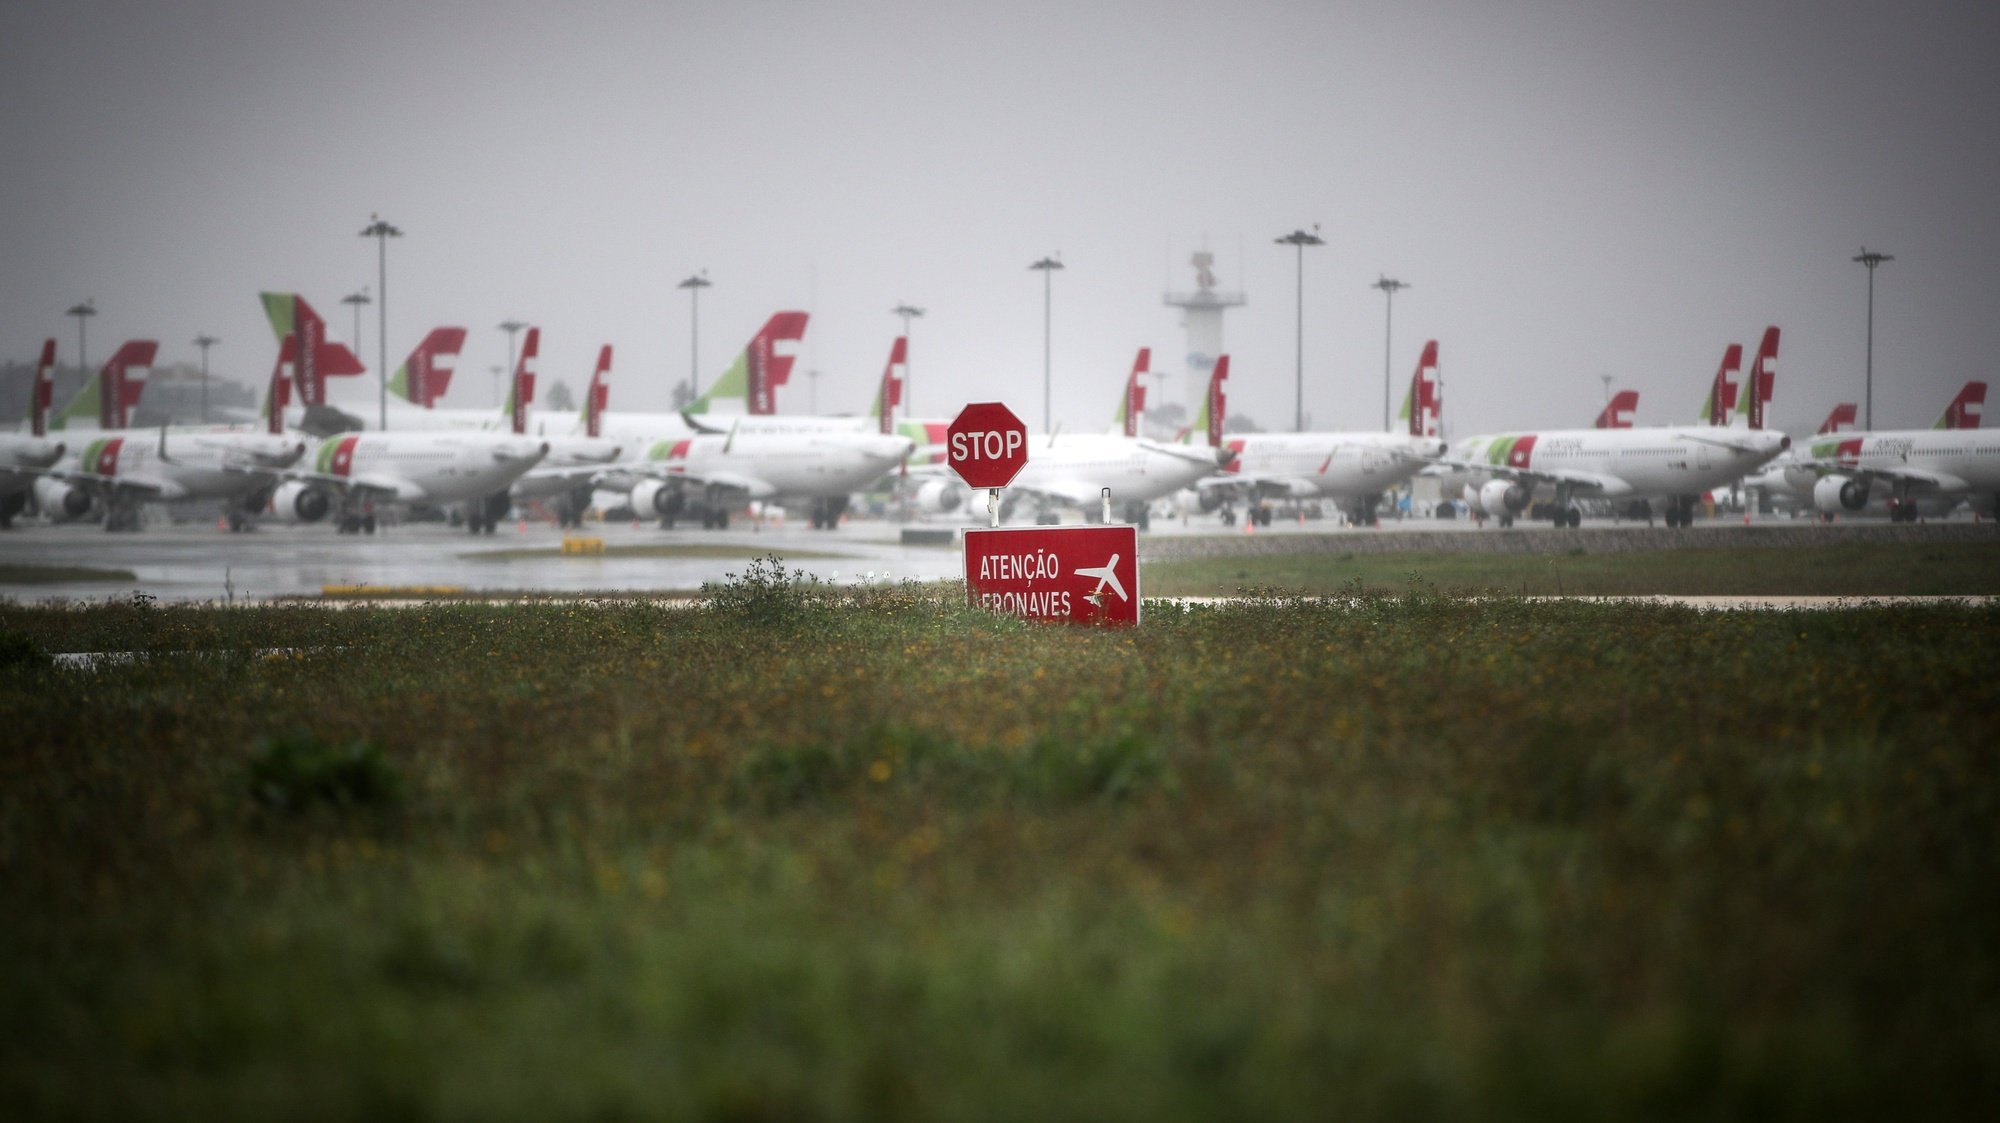 File photo dated from 09 April 2020 of TAP Air Portugal aircraft remain grounded at Humberto Delgado airport closed for passenger traffic as part of the exceptional traffic measures to combat the epidemiological situation of Covid-19, in Lisbon, Portugal, 09 April 2020 (reissued 02 July 2020). The granting of state support to TAP has been under discussion since the airline&#039;s activity came to a standstill because of the coronavirus pandemic, with an agreed injection of up to 1,200 million euros. MARIO CRUZ/LUSA